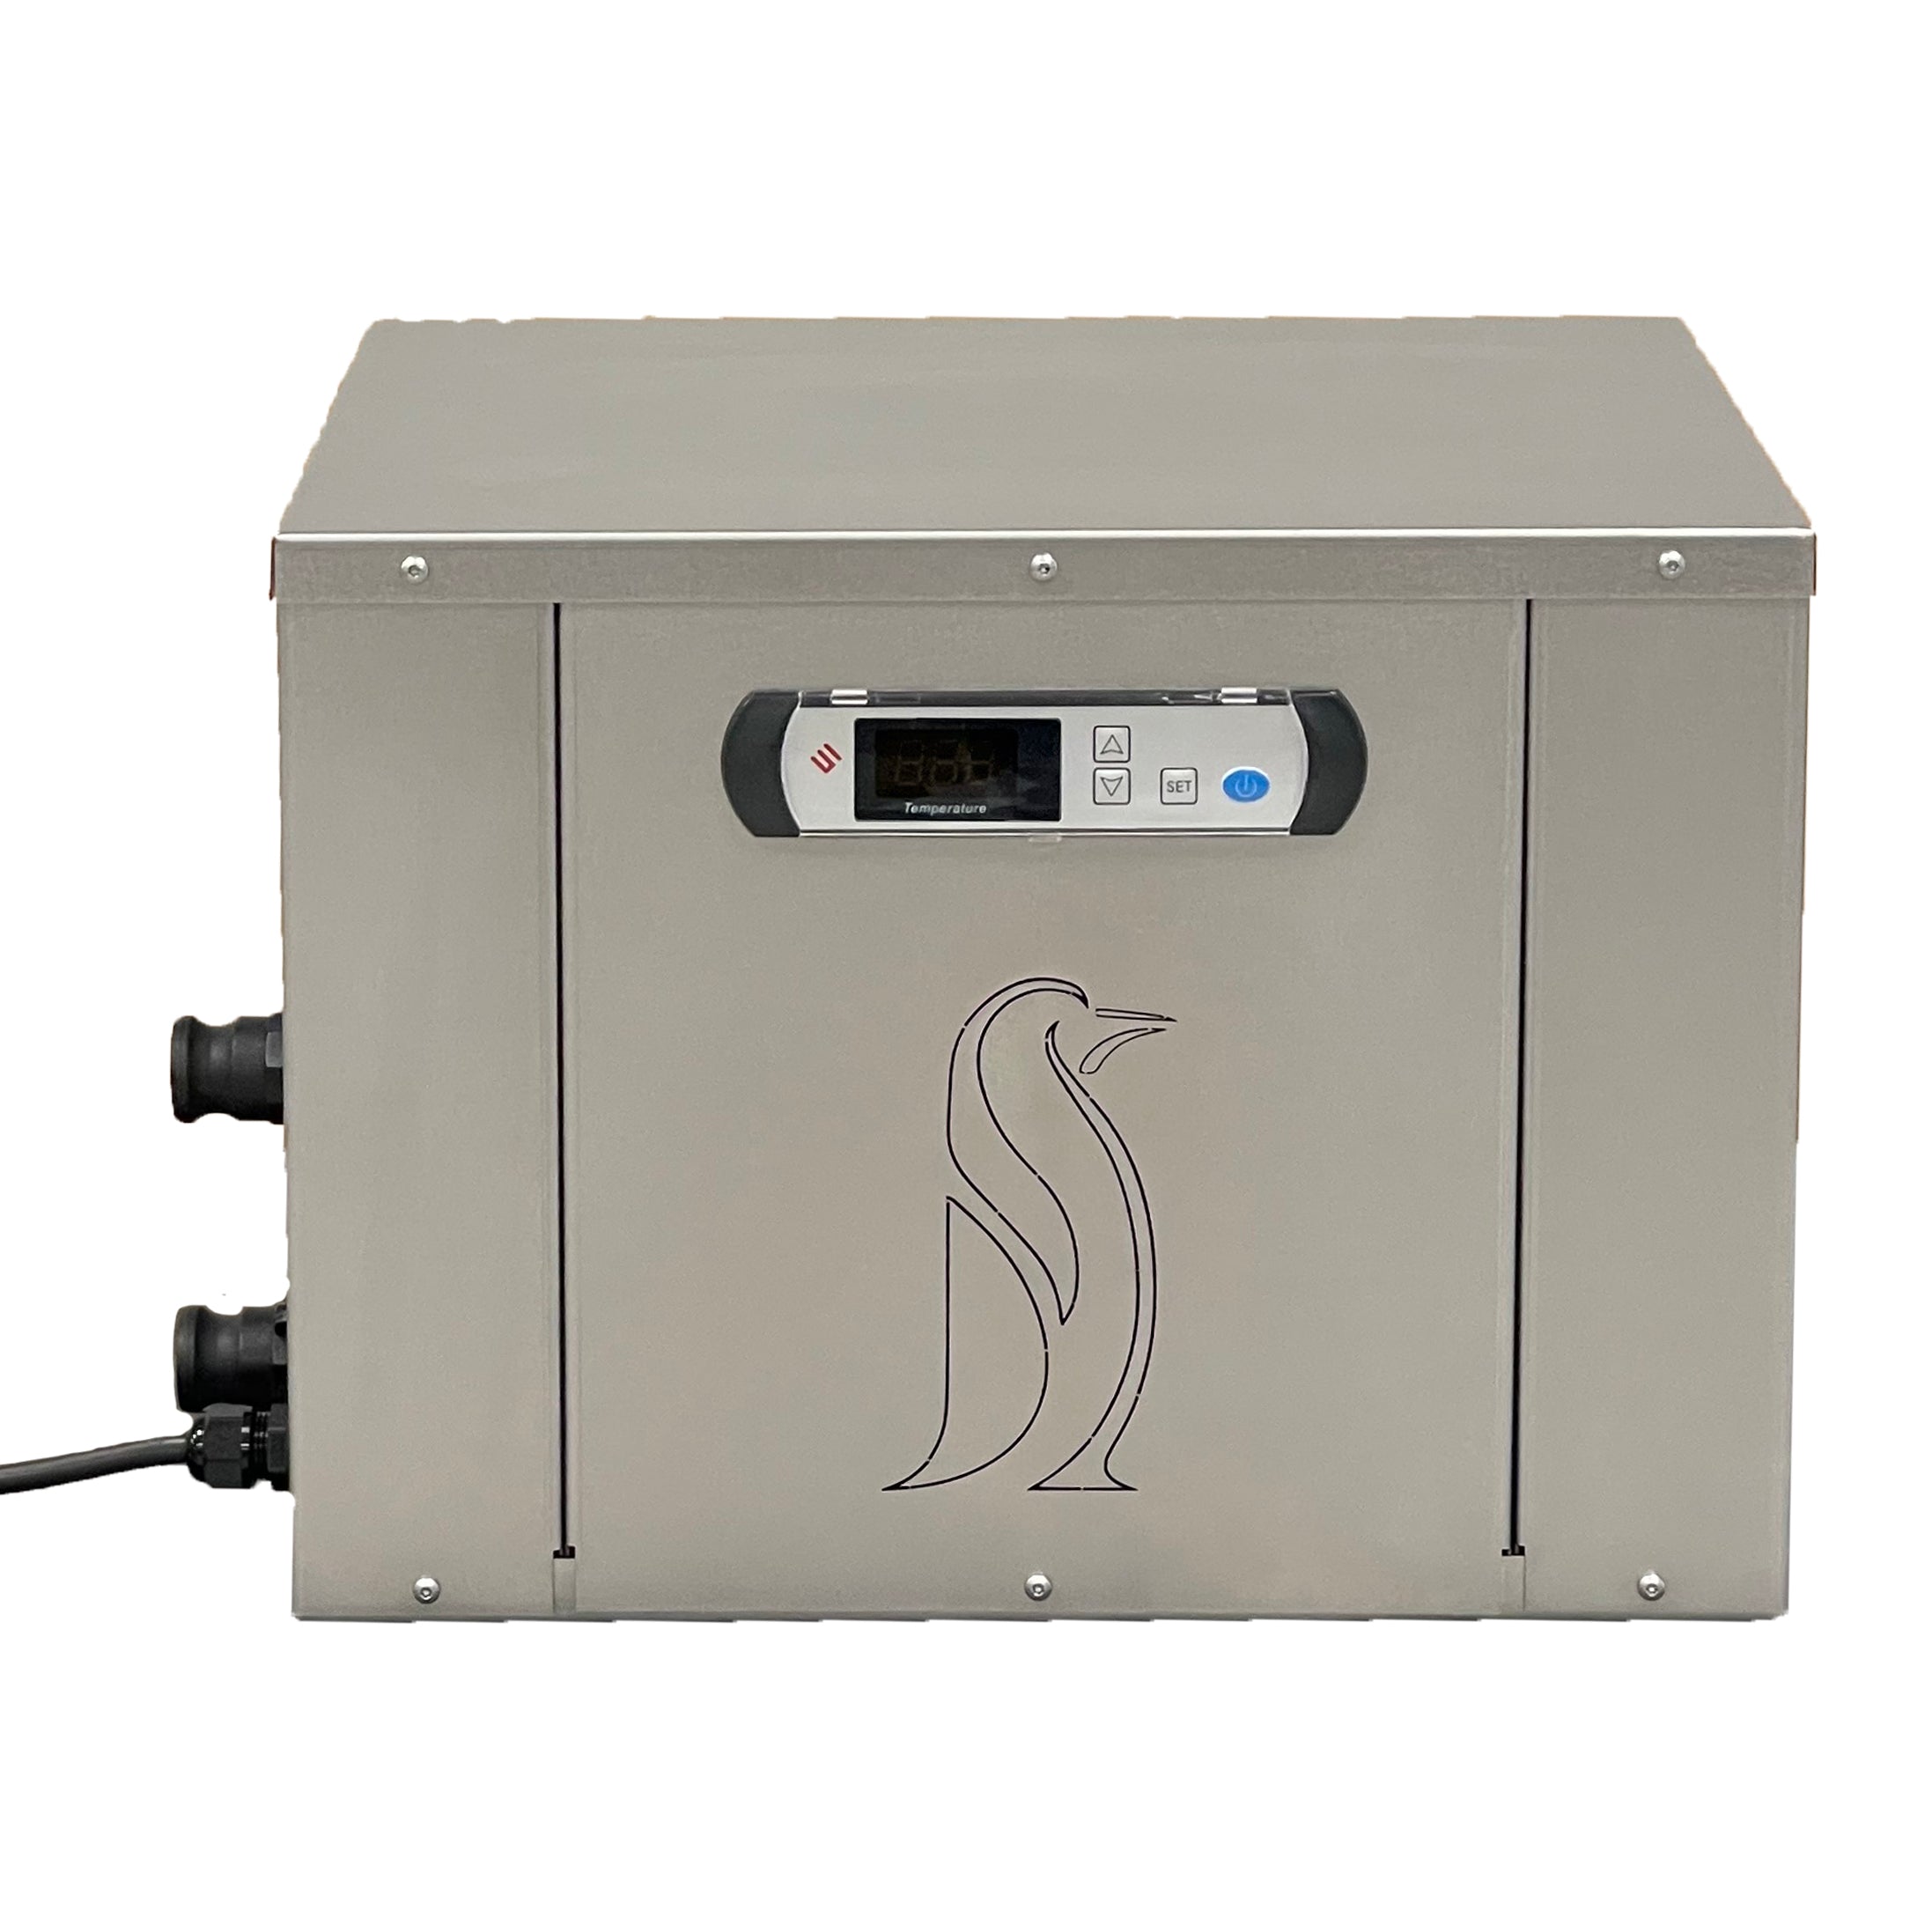 Penguin Chiller side view with console